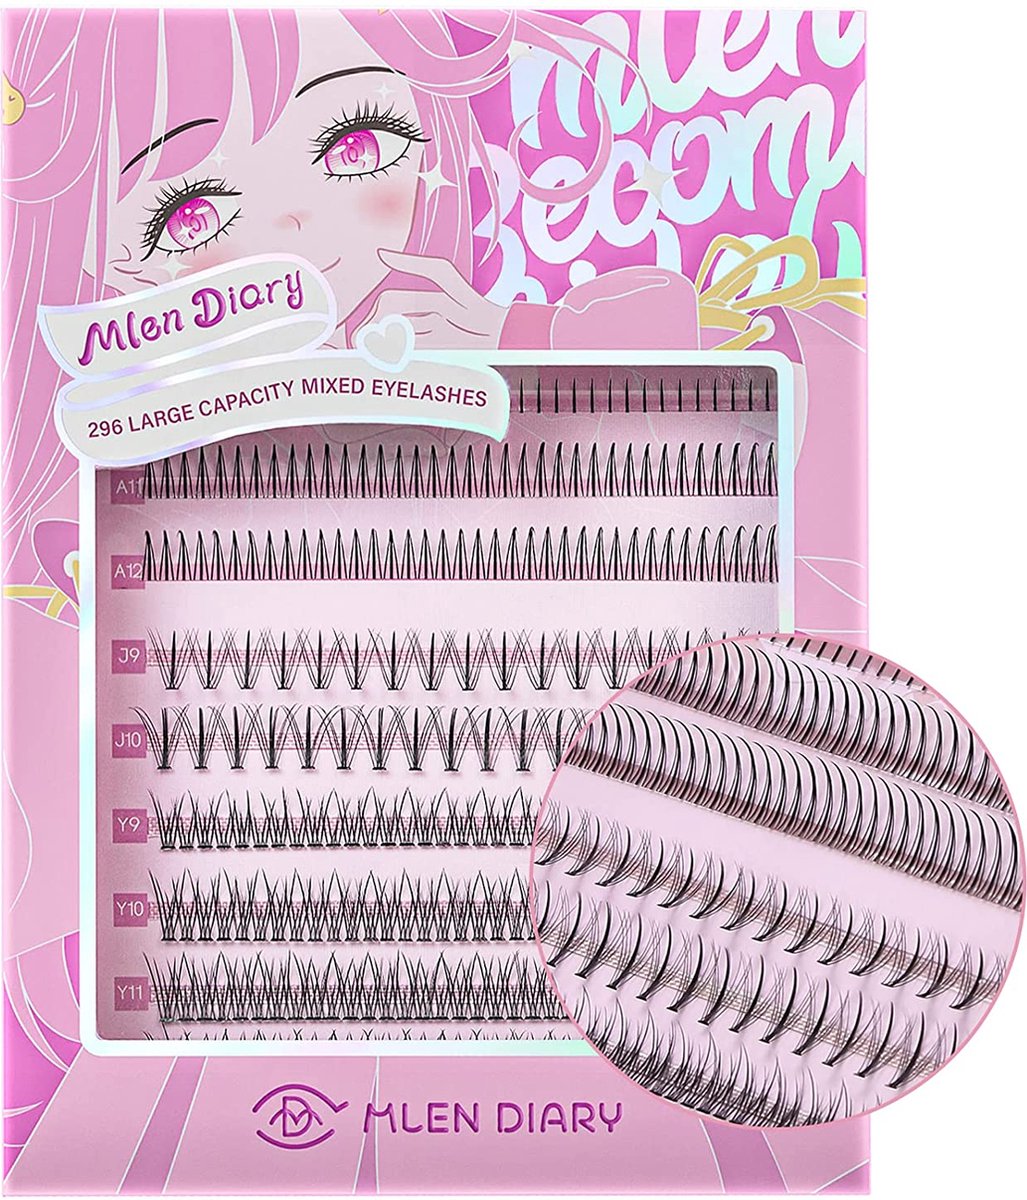 MLEN DIARY 296 Stuks individuele wimpers - Faux mink lash clusters pack - manga anime lashes - Manhua lashes - Natuurlijke look wimpers - eyelashes - one by one lashes